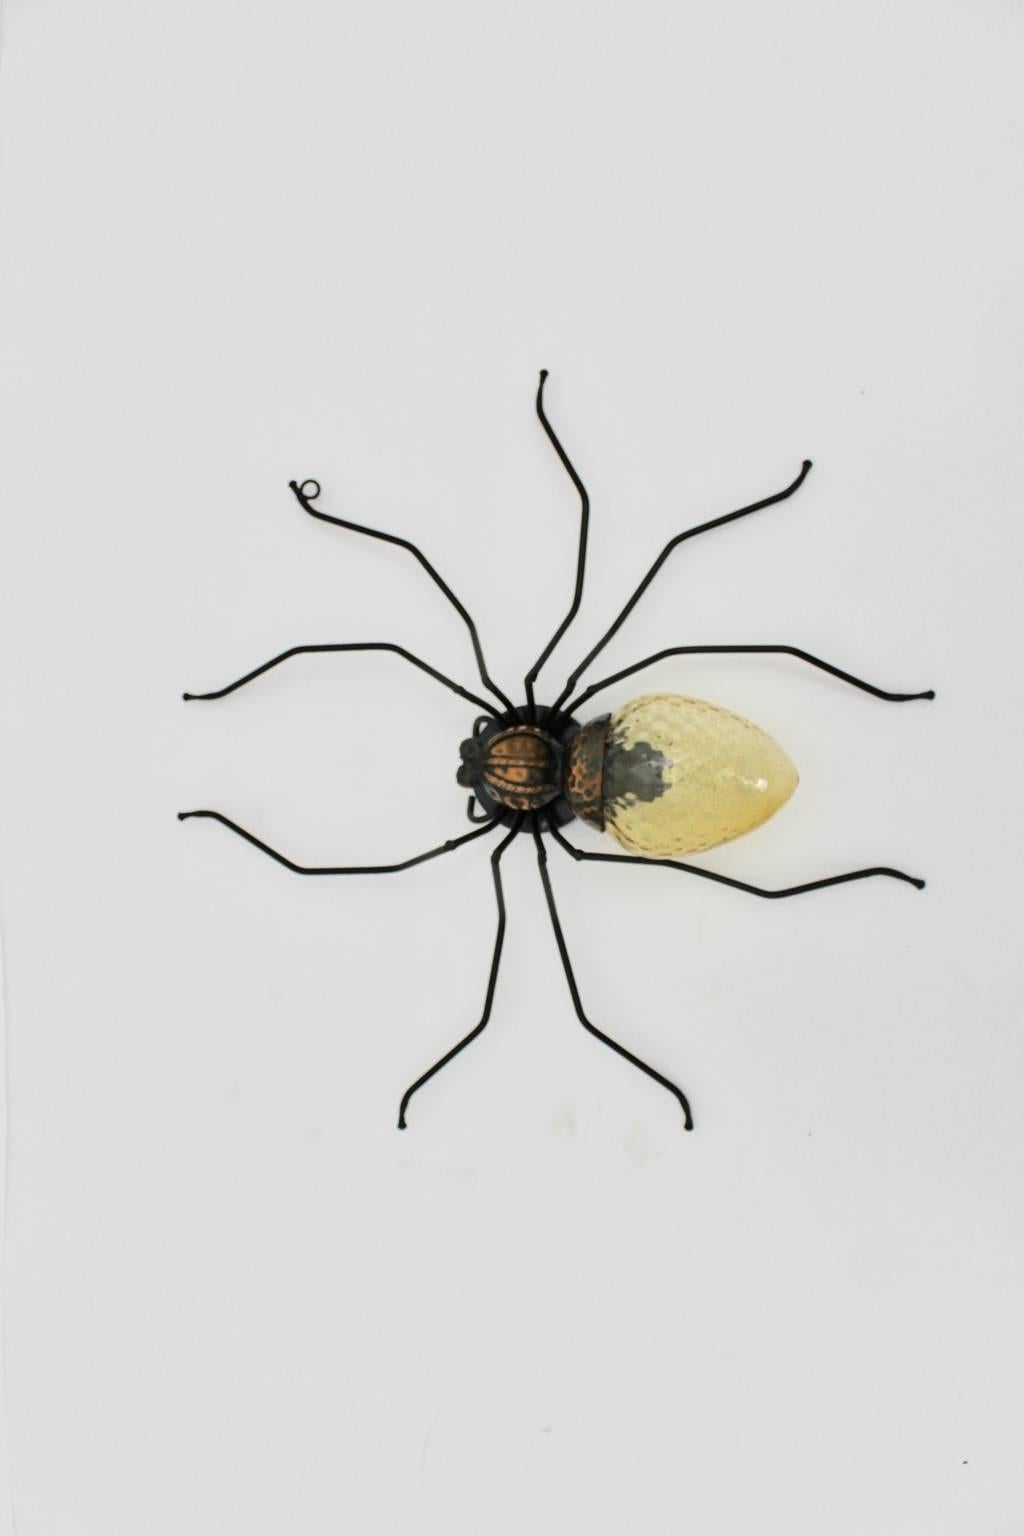 Large sized mid century modern handmade wall lamp shaped like a spider. The legs were made of metal wire, while the glass shade was made of yellow grooved glass with a E 14 socket.

The condition is very good - carefully cleaned.
Measures:
Width 60